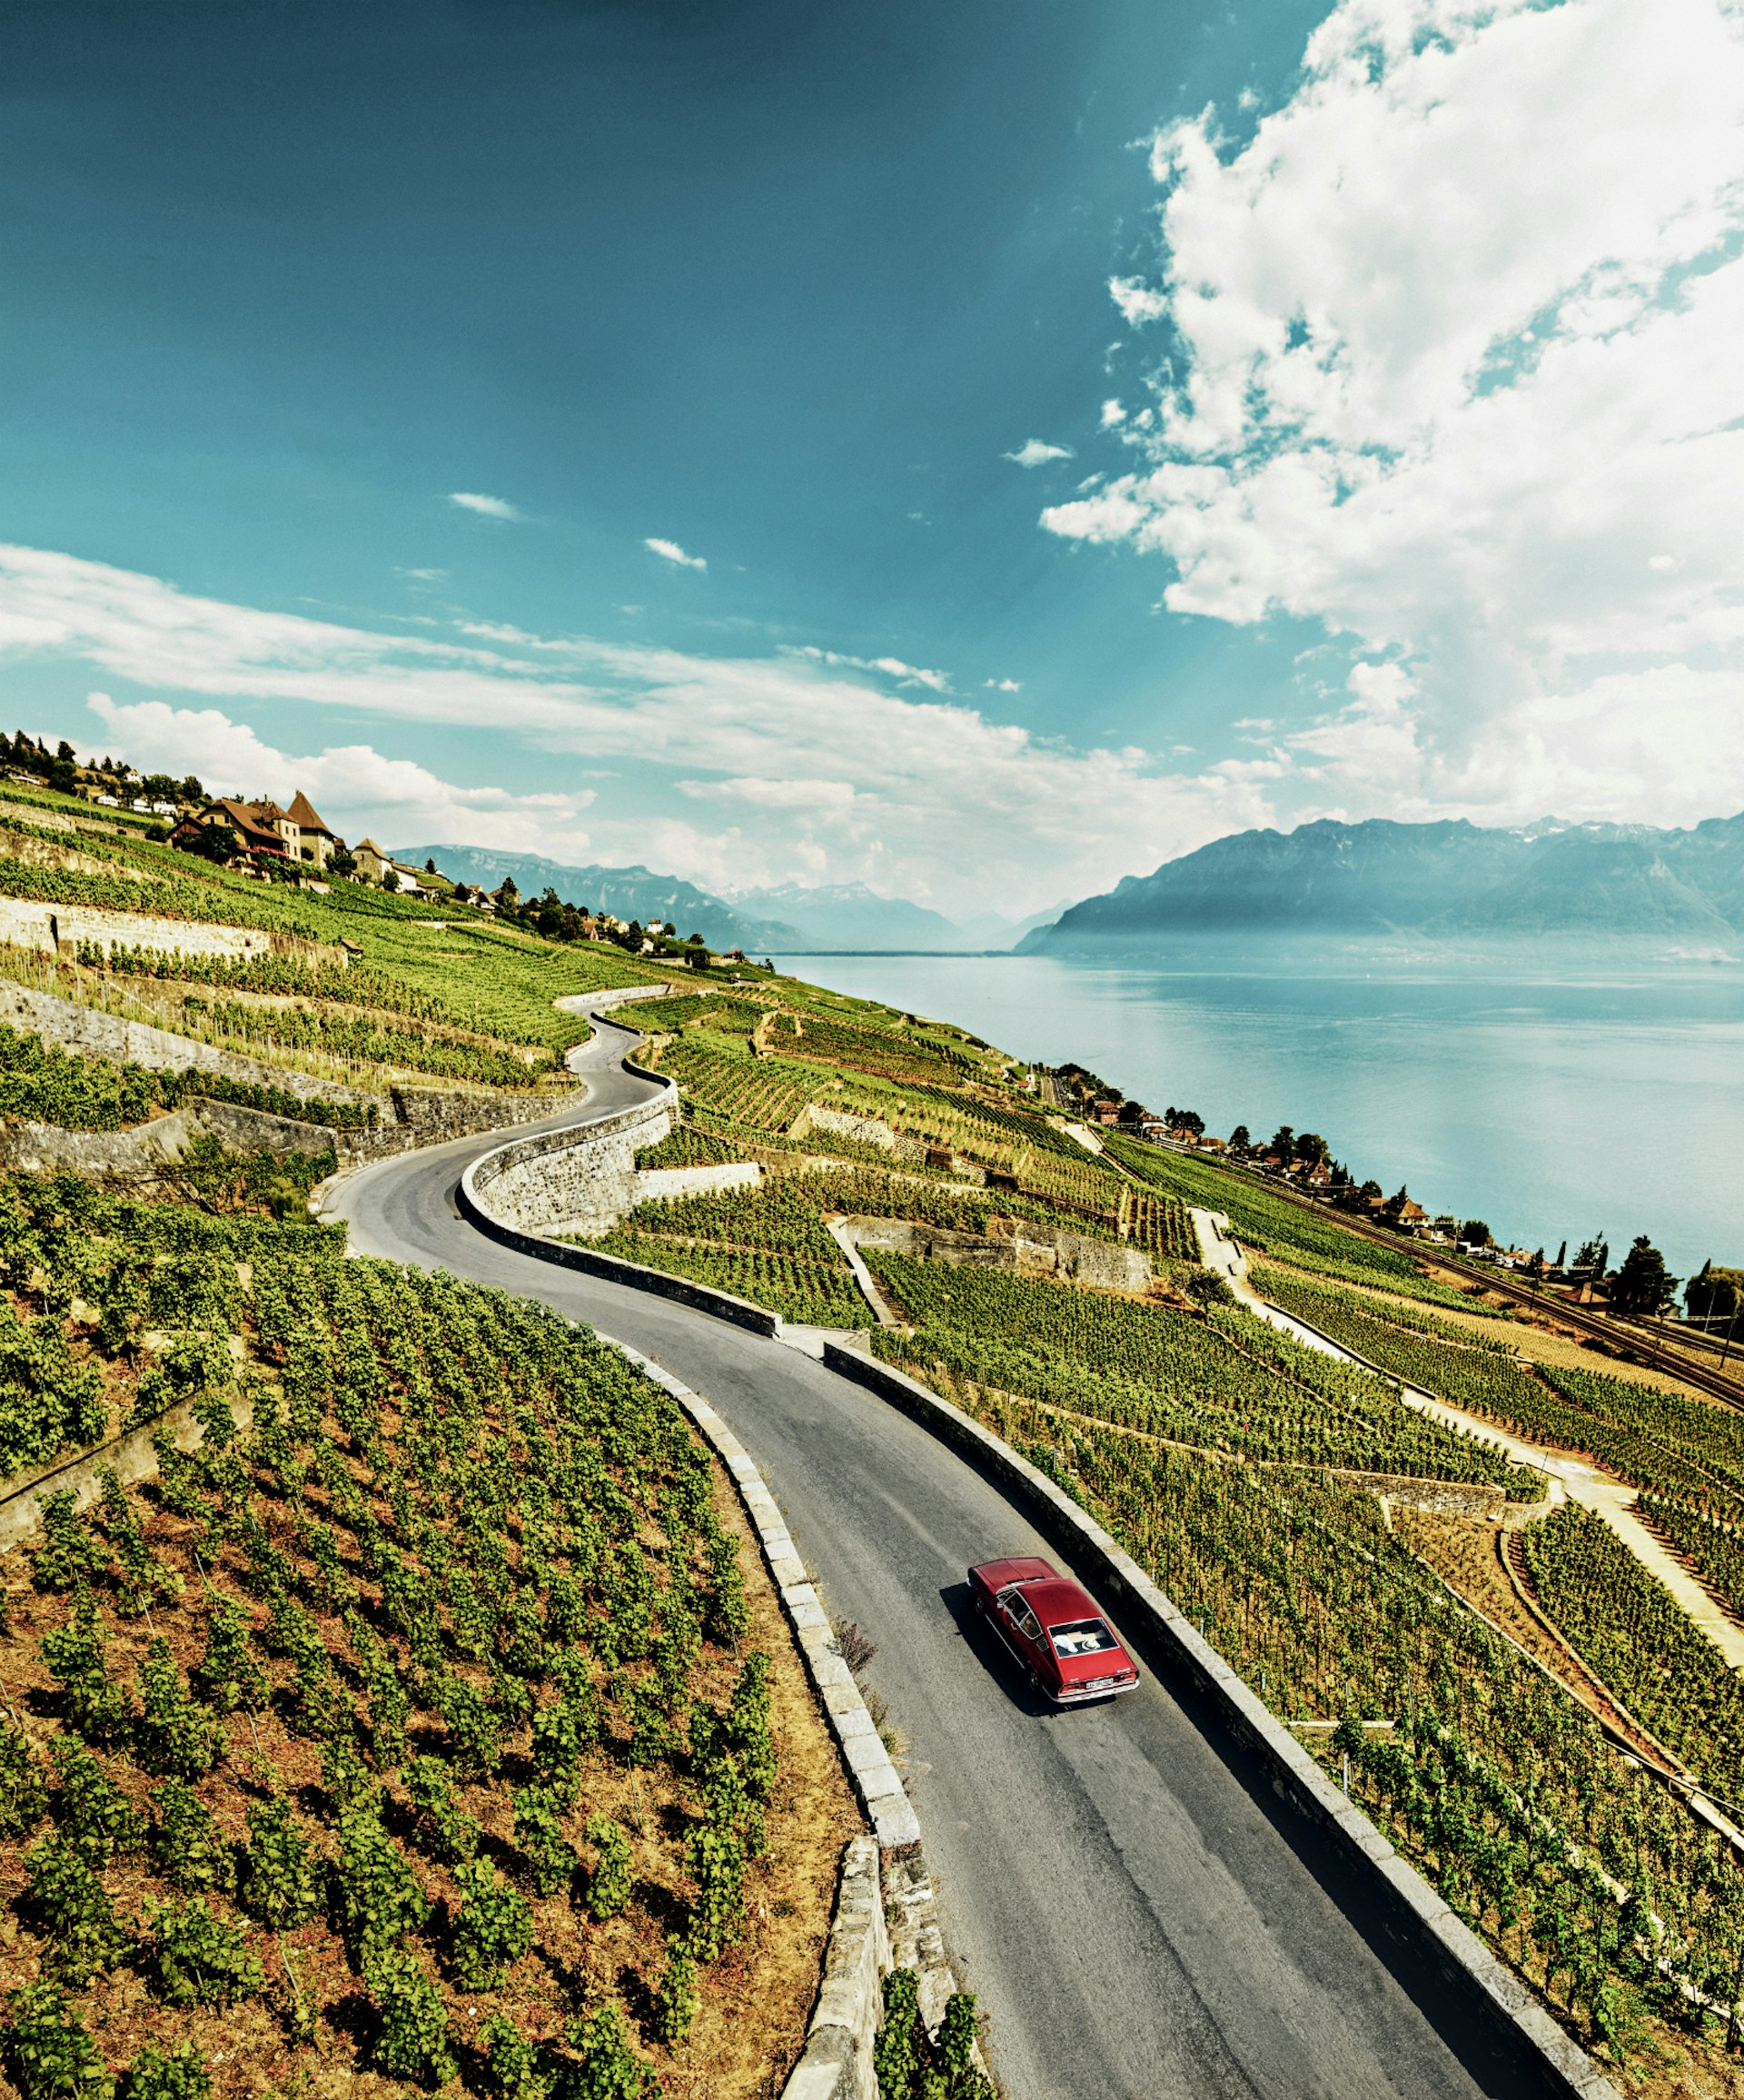 A car driving through a vineyard in Switzerland with views across a lake